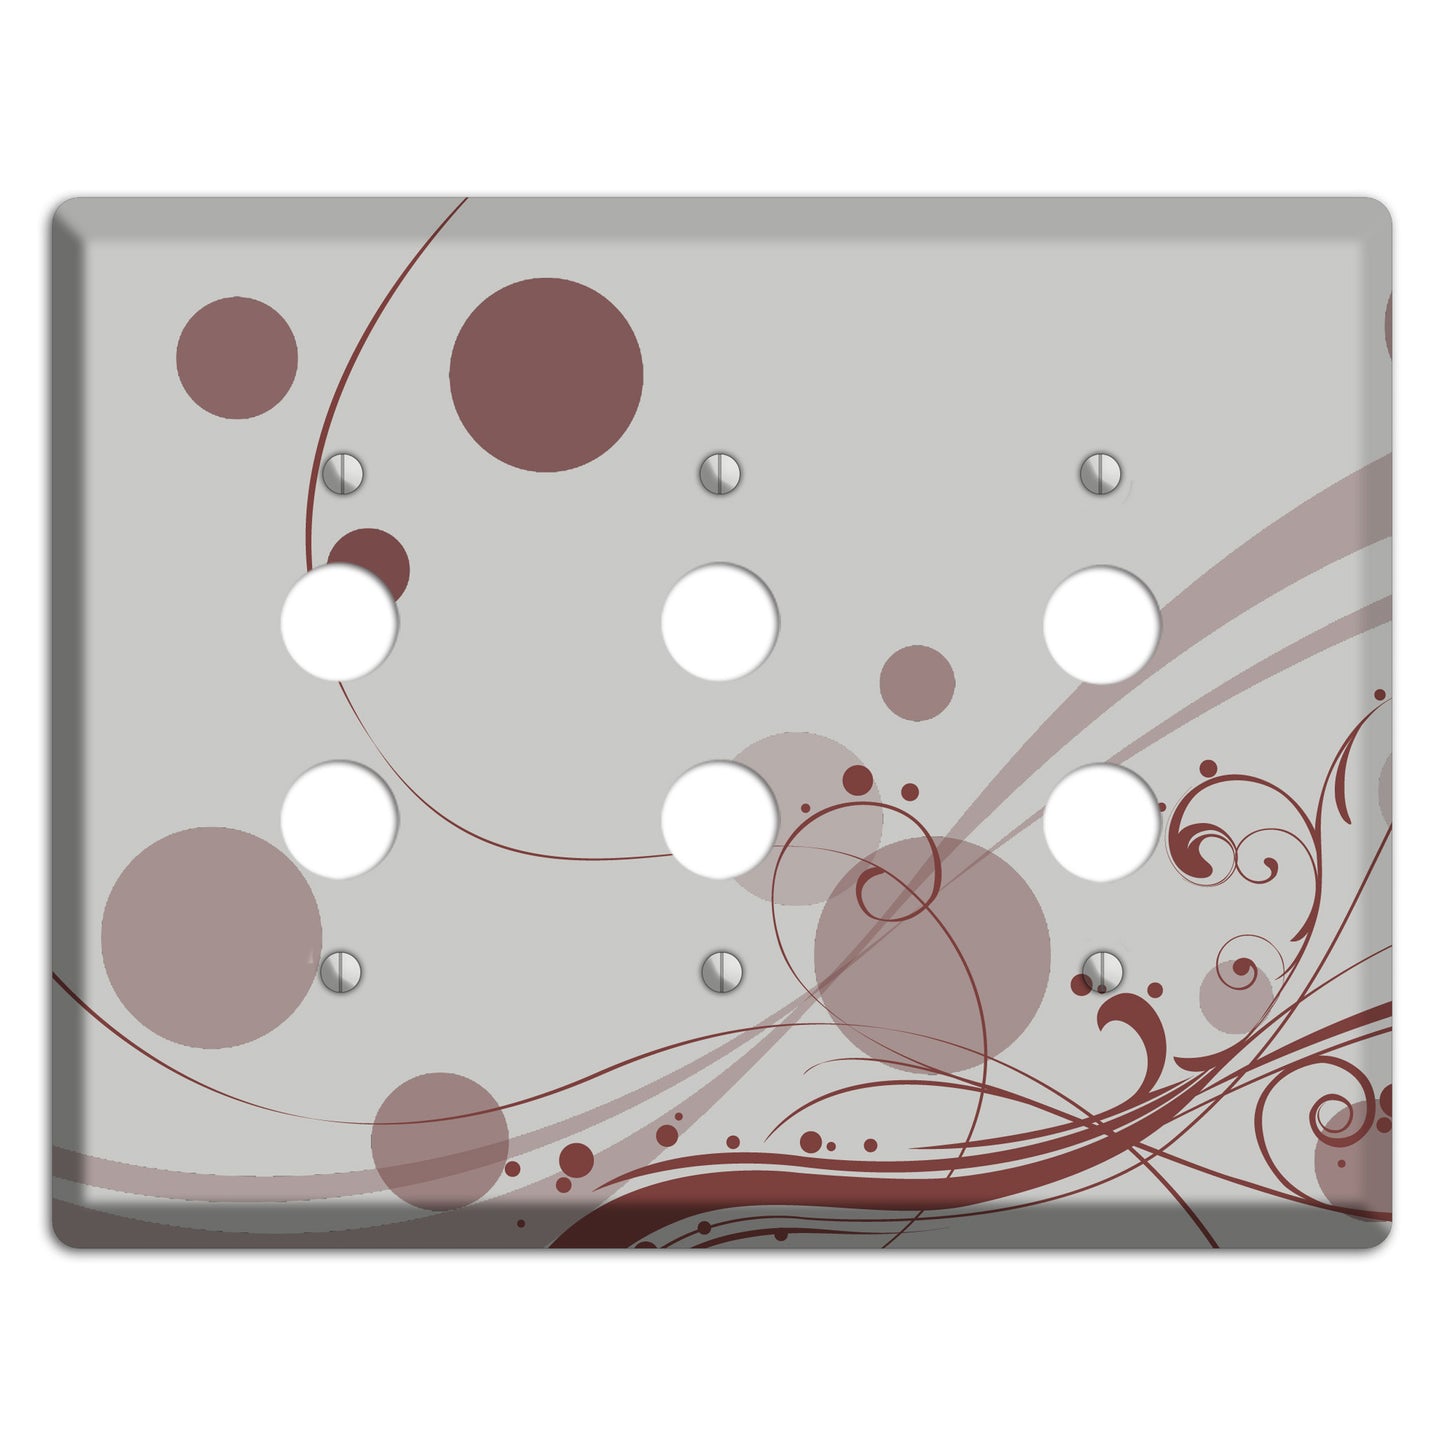 Grey with Maroon Dots and Swirls 3 Pushbutton Wallplate